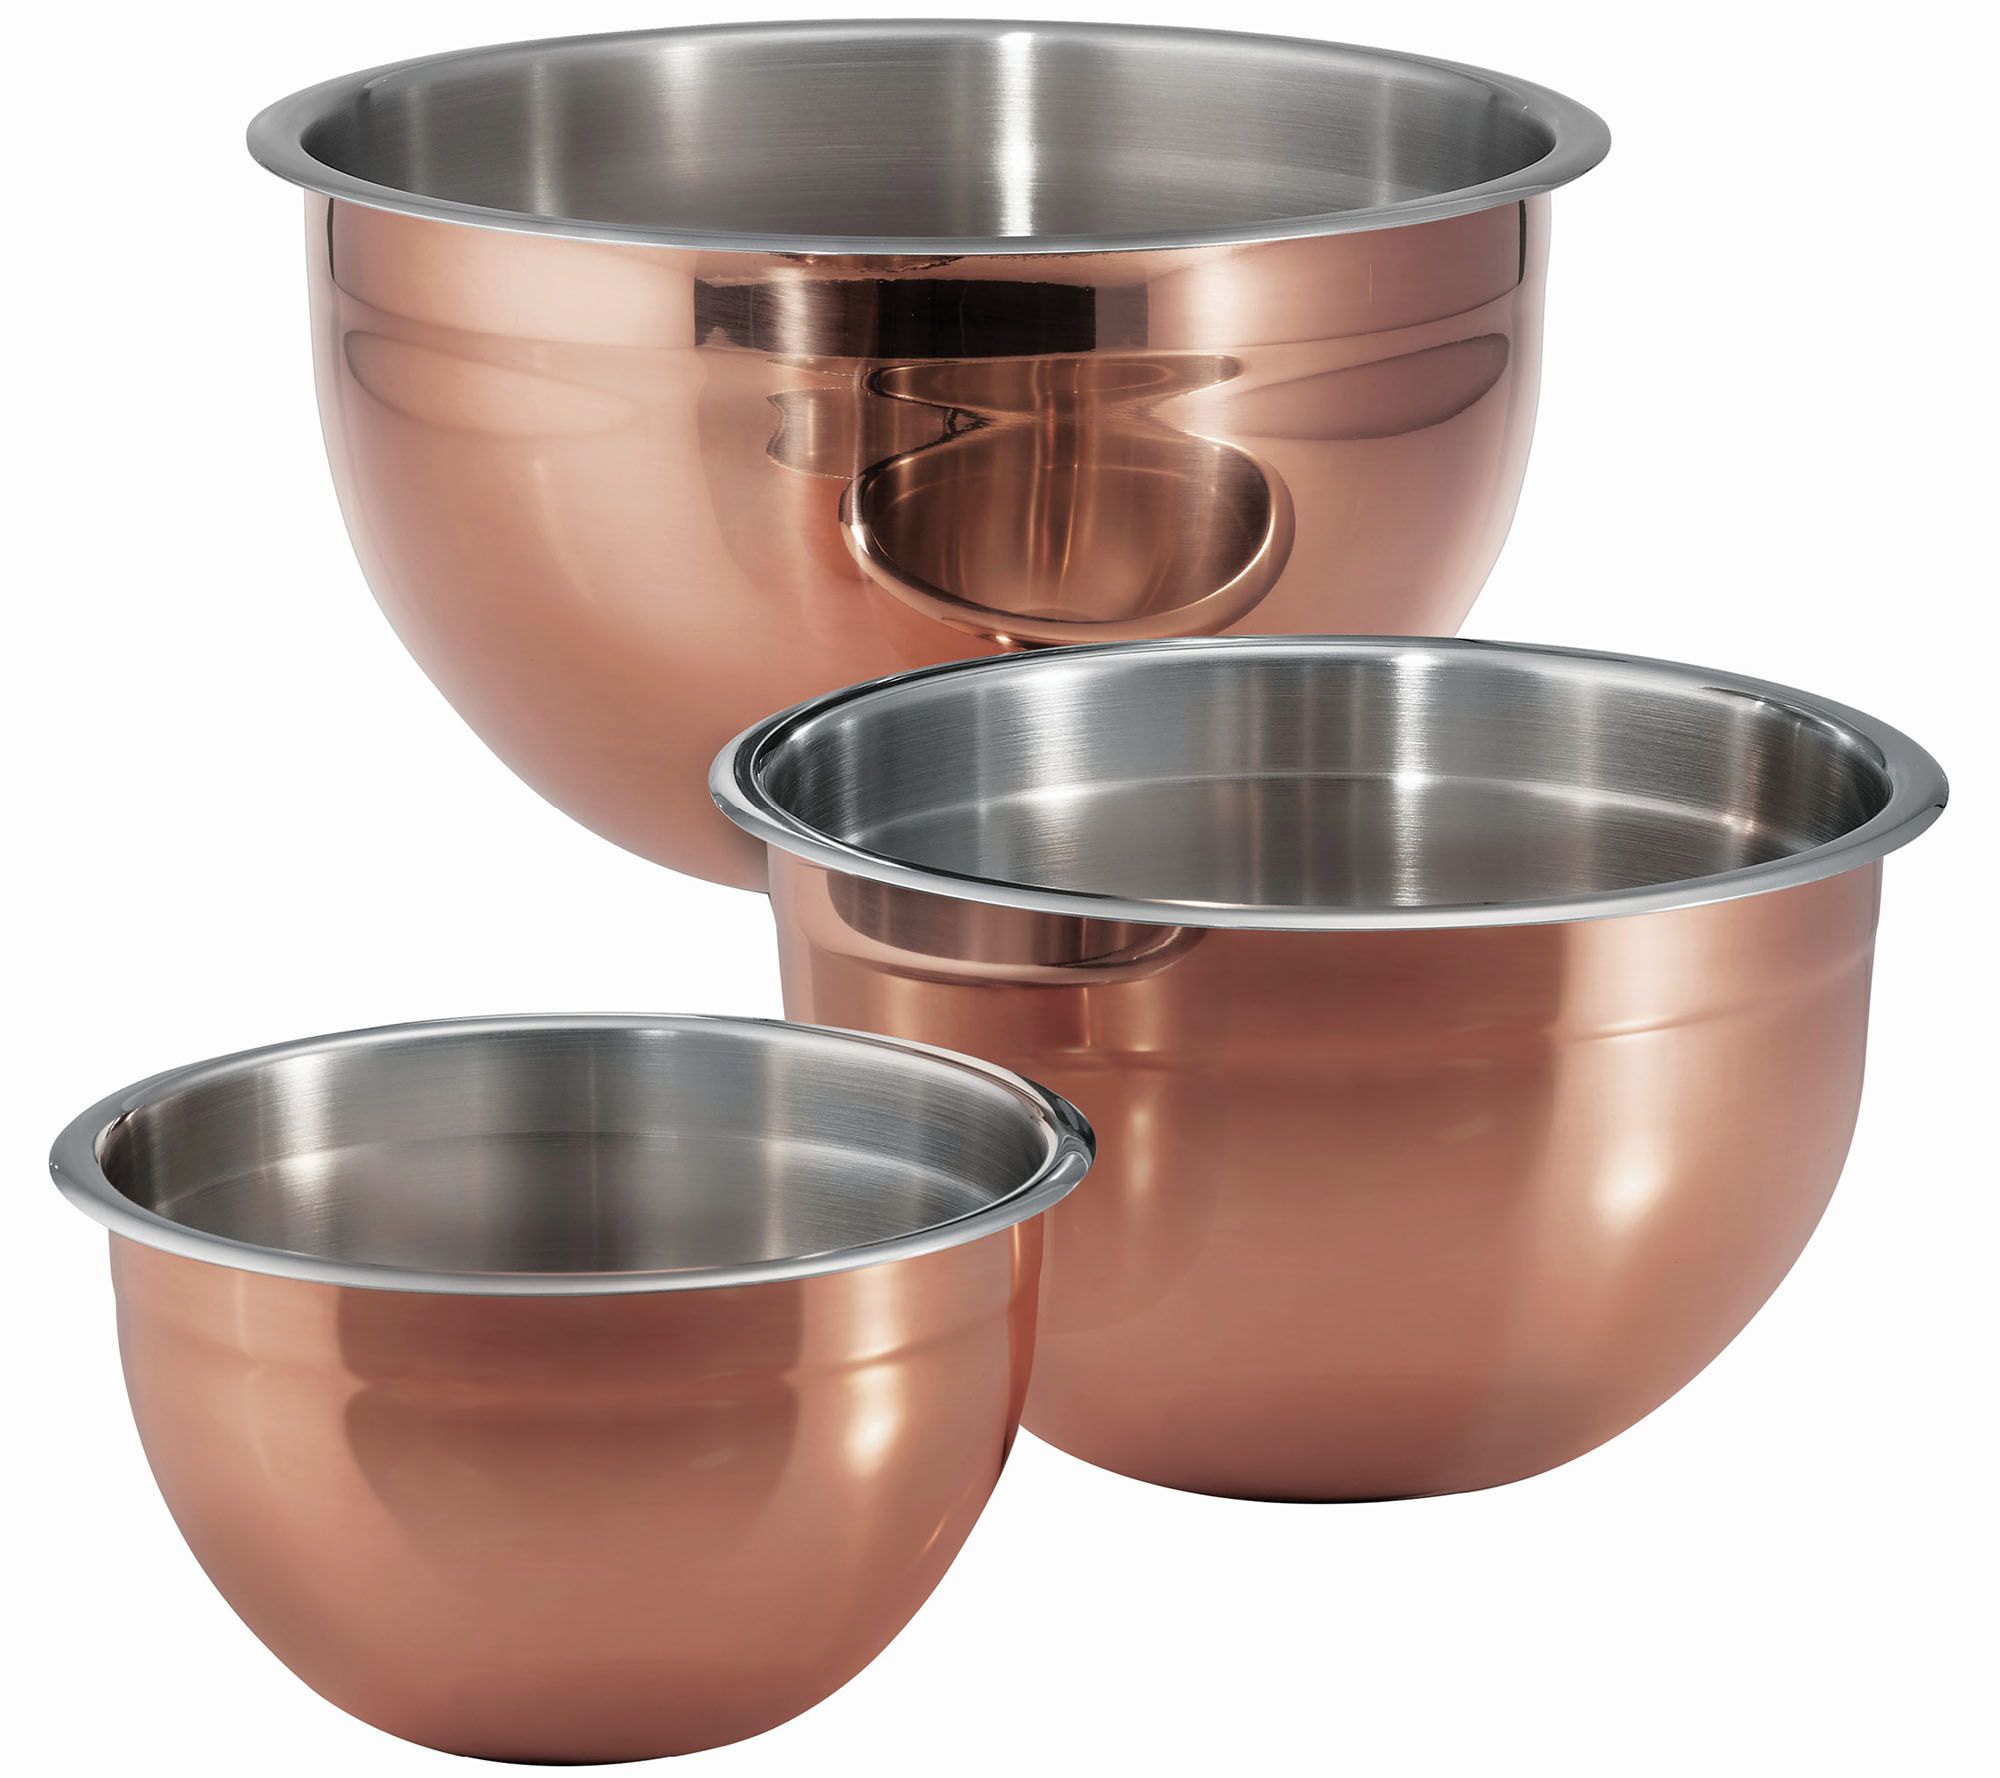 Tramontina Stainless Steel Mixing Bowls 10 Pc Kitchen Set w/ Lids